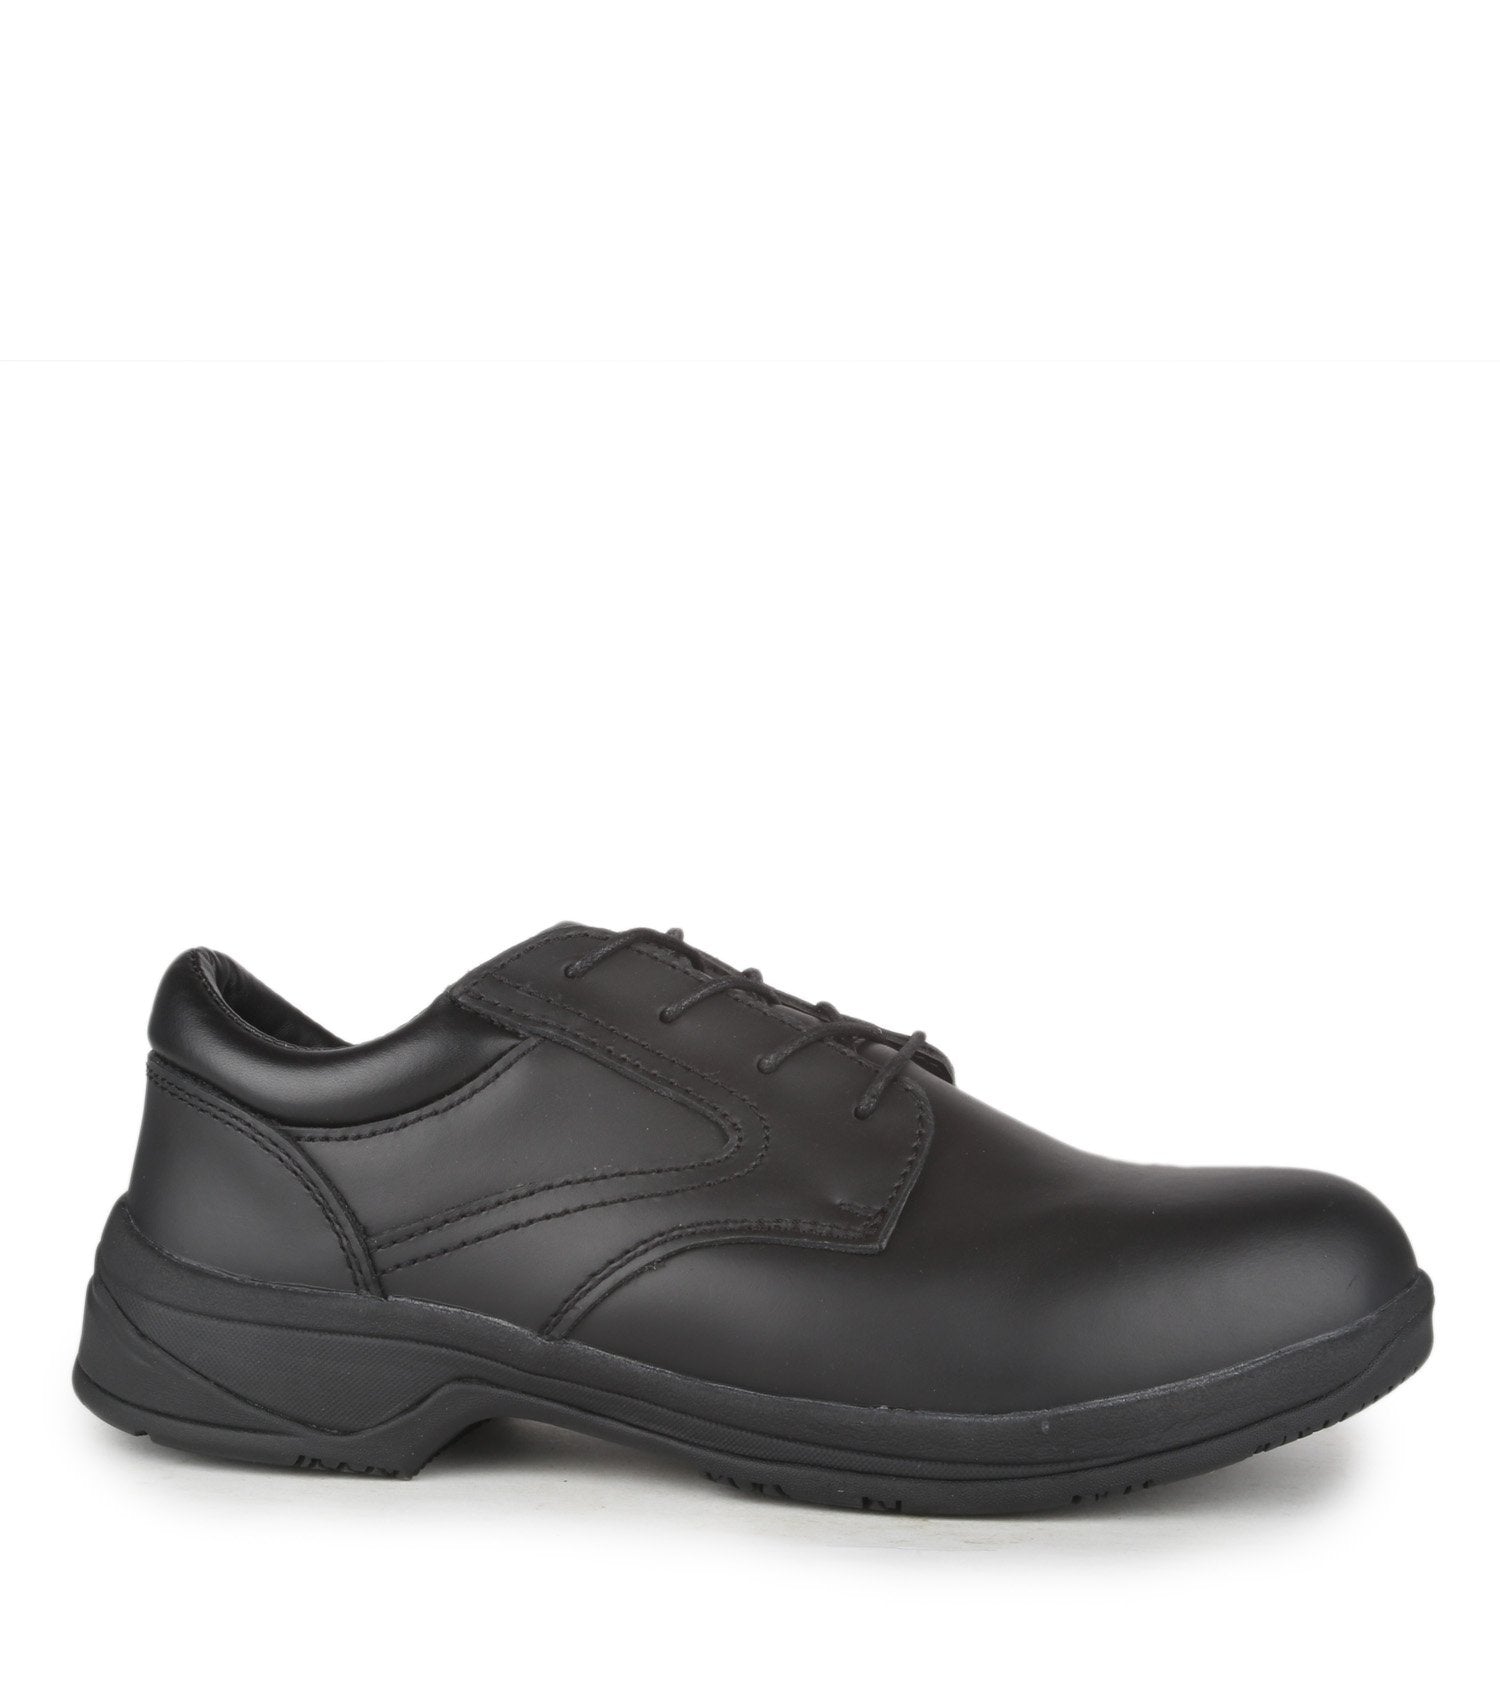 STC Brome II Safety Shoe | Black | Narrow, Medium or Wide Widths | Sizes 3.5 - 14 Work Boots - Cleanflow